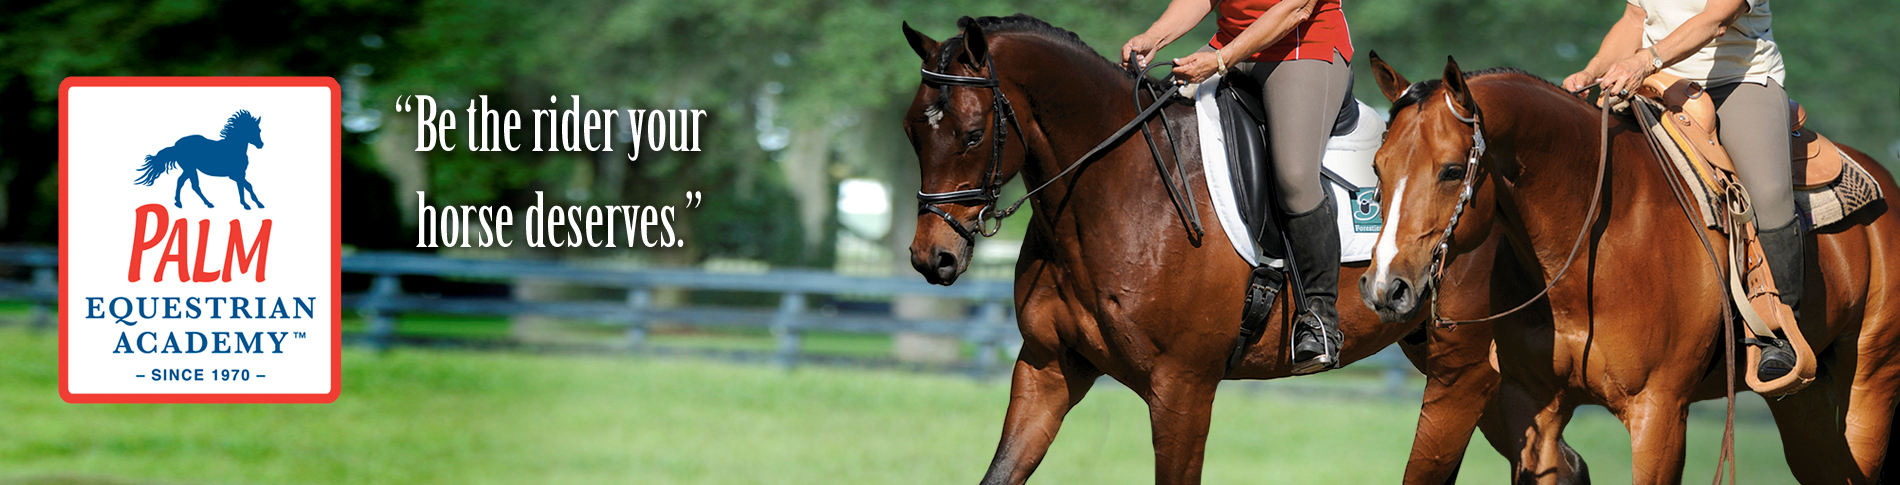 Exercises for Equestrians - Part 2